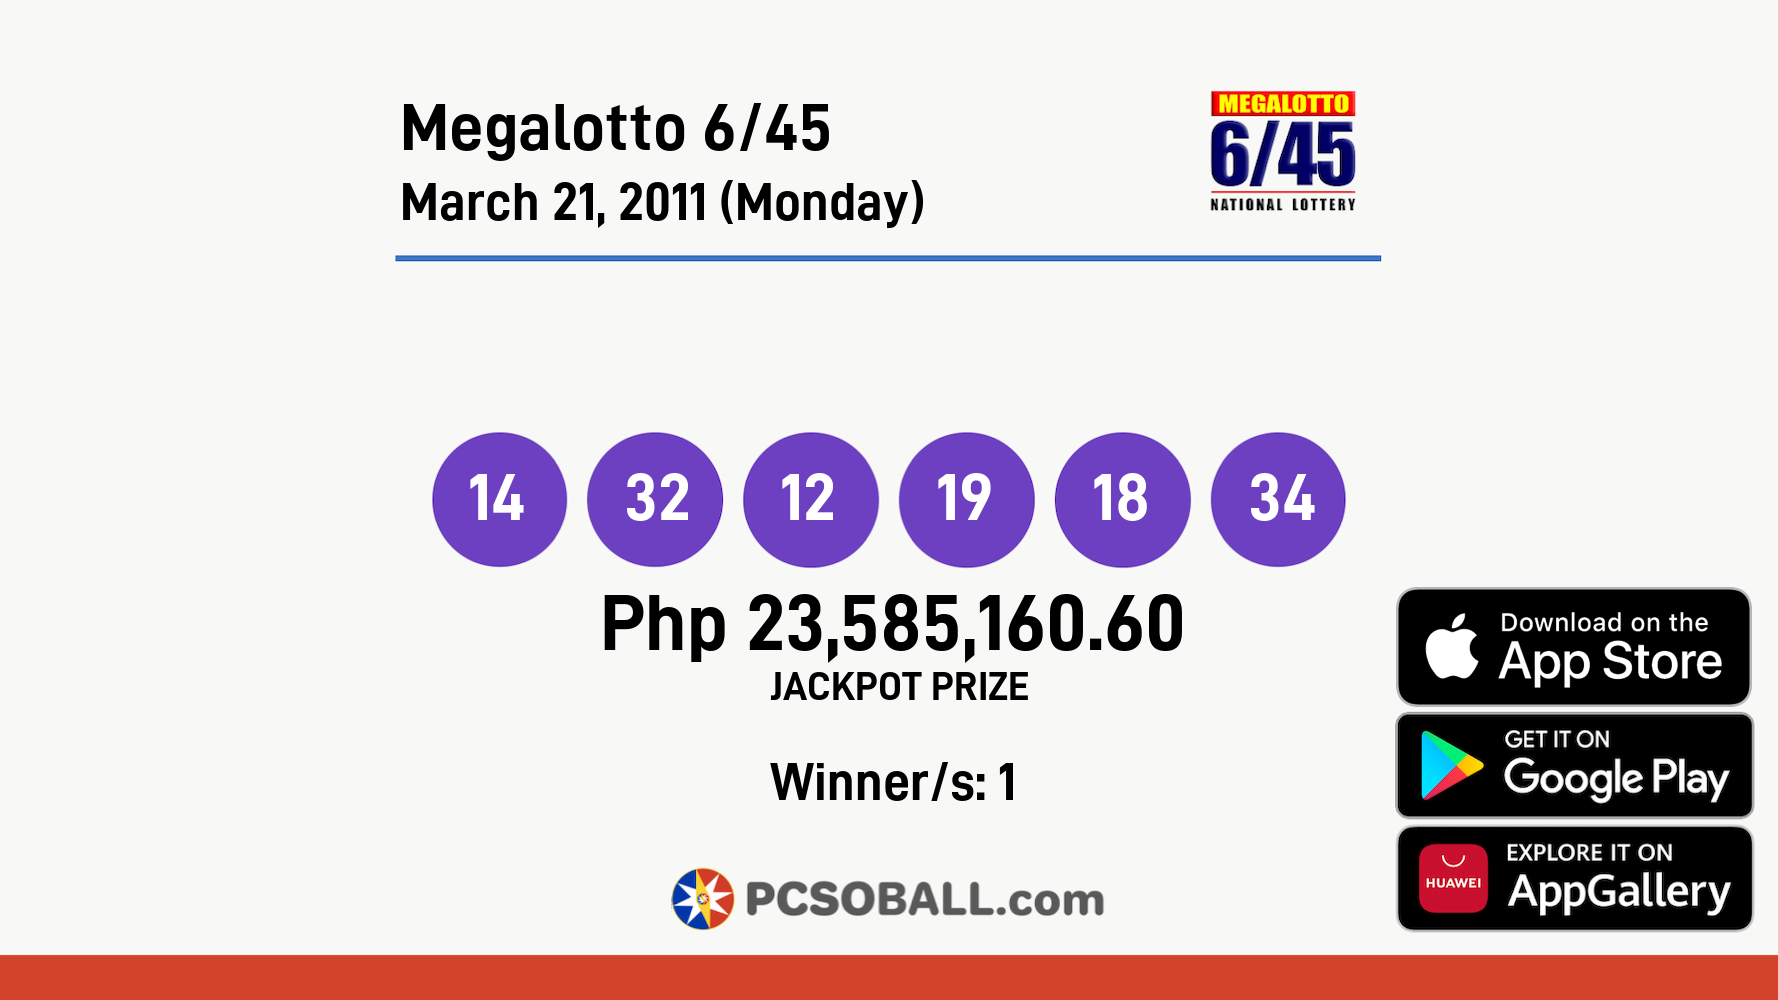 Megalotto 6/45 March 21, 2011 (Monday) Result